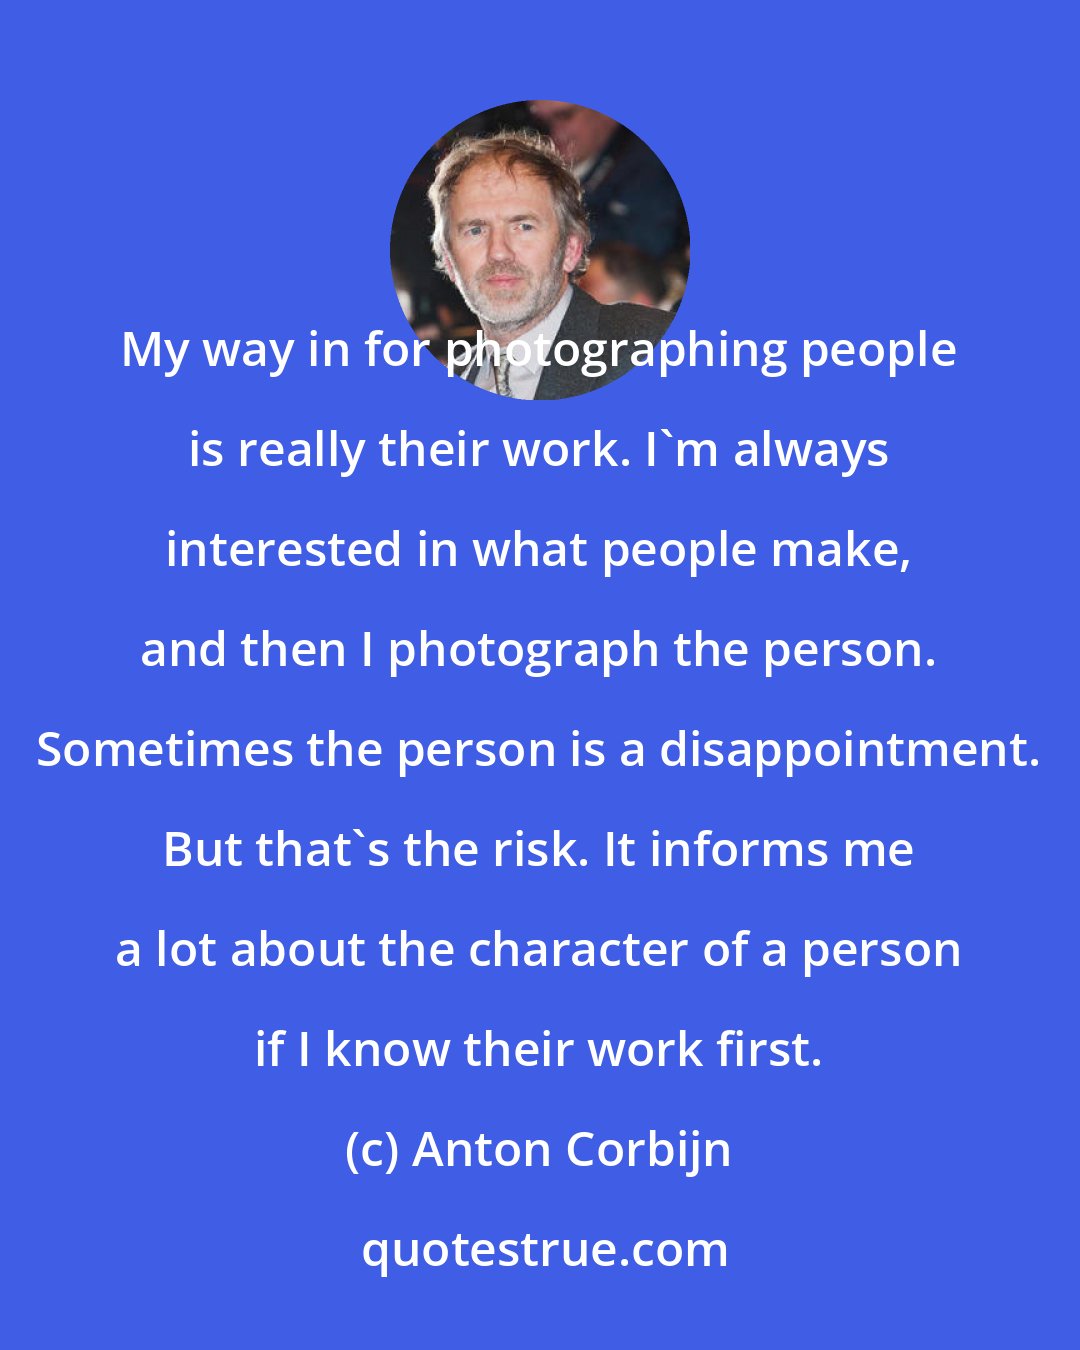 Anton Corbijn: My way in for photographing people is really their work. I'm always interested in what people make, and then I photograph the person. Sometimes the person is a disappointment. But that's the risk. It informs me a lot about the character of a person if I know their work first.